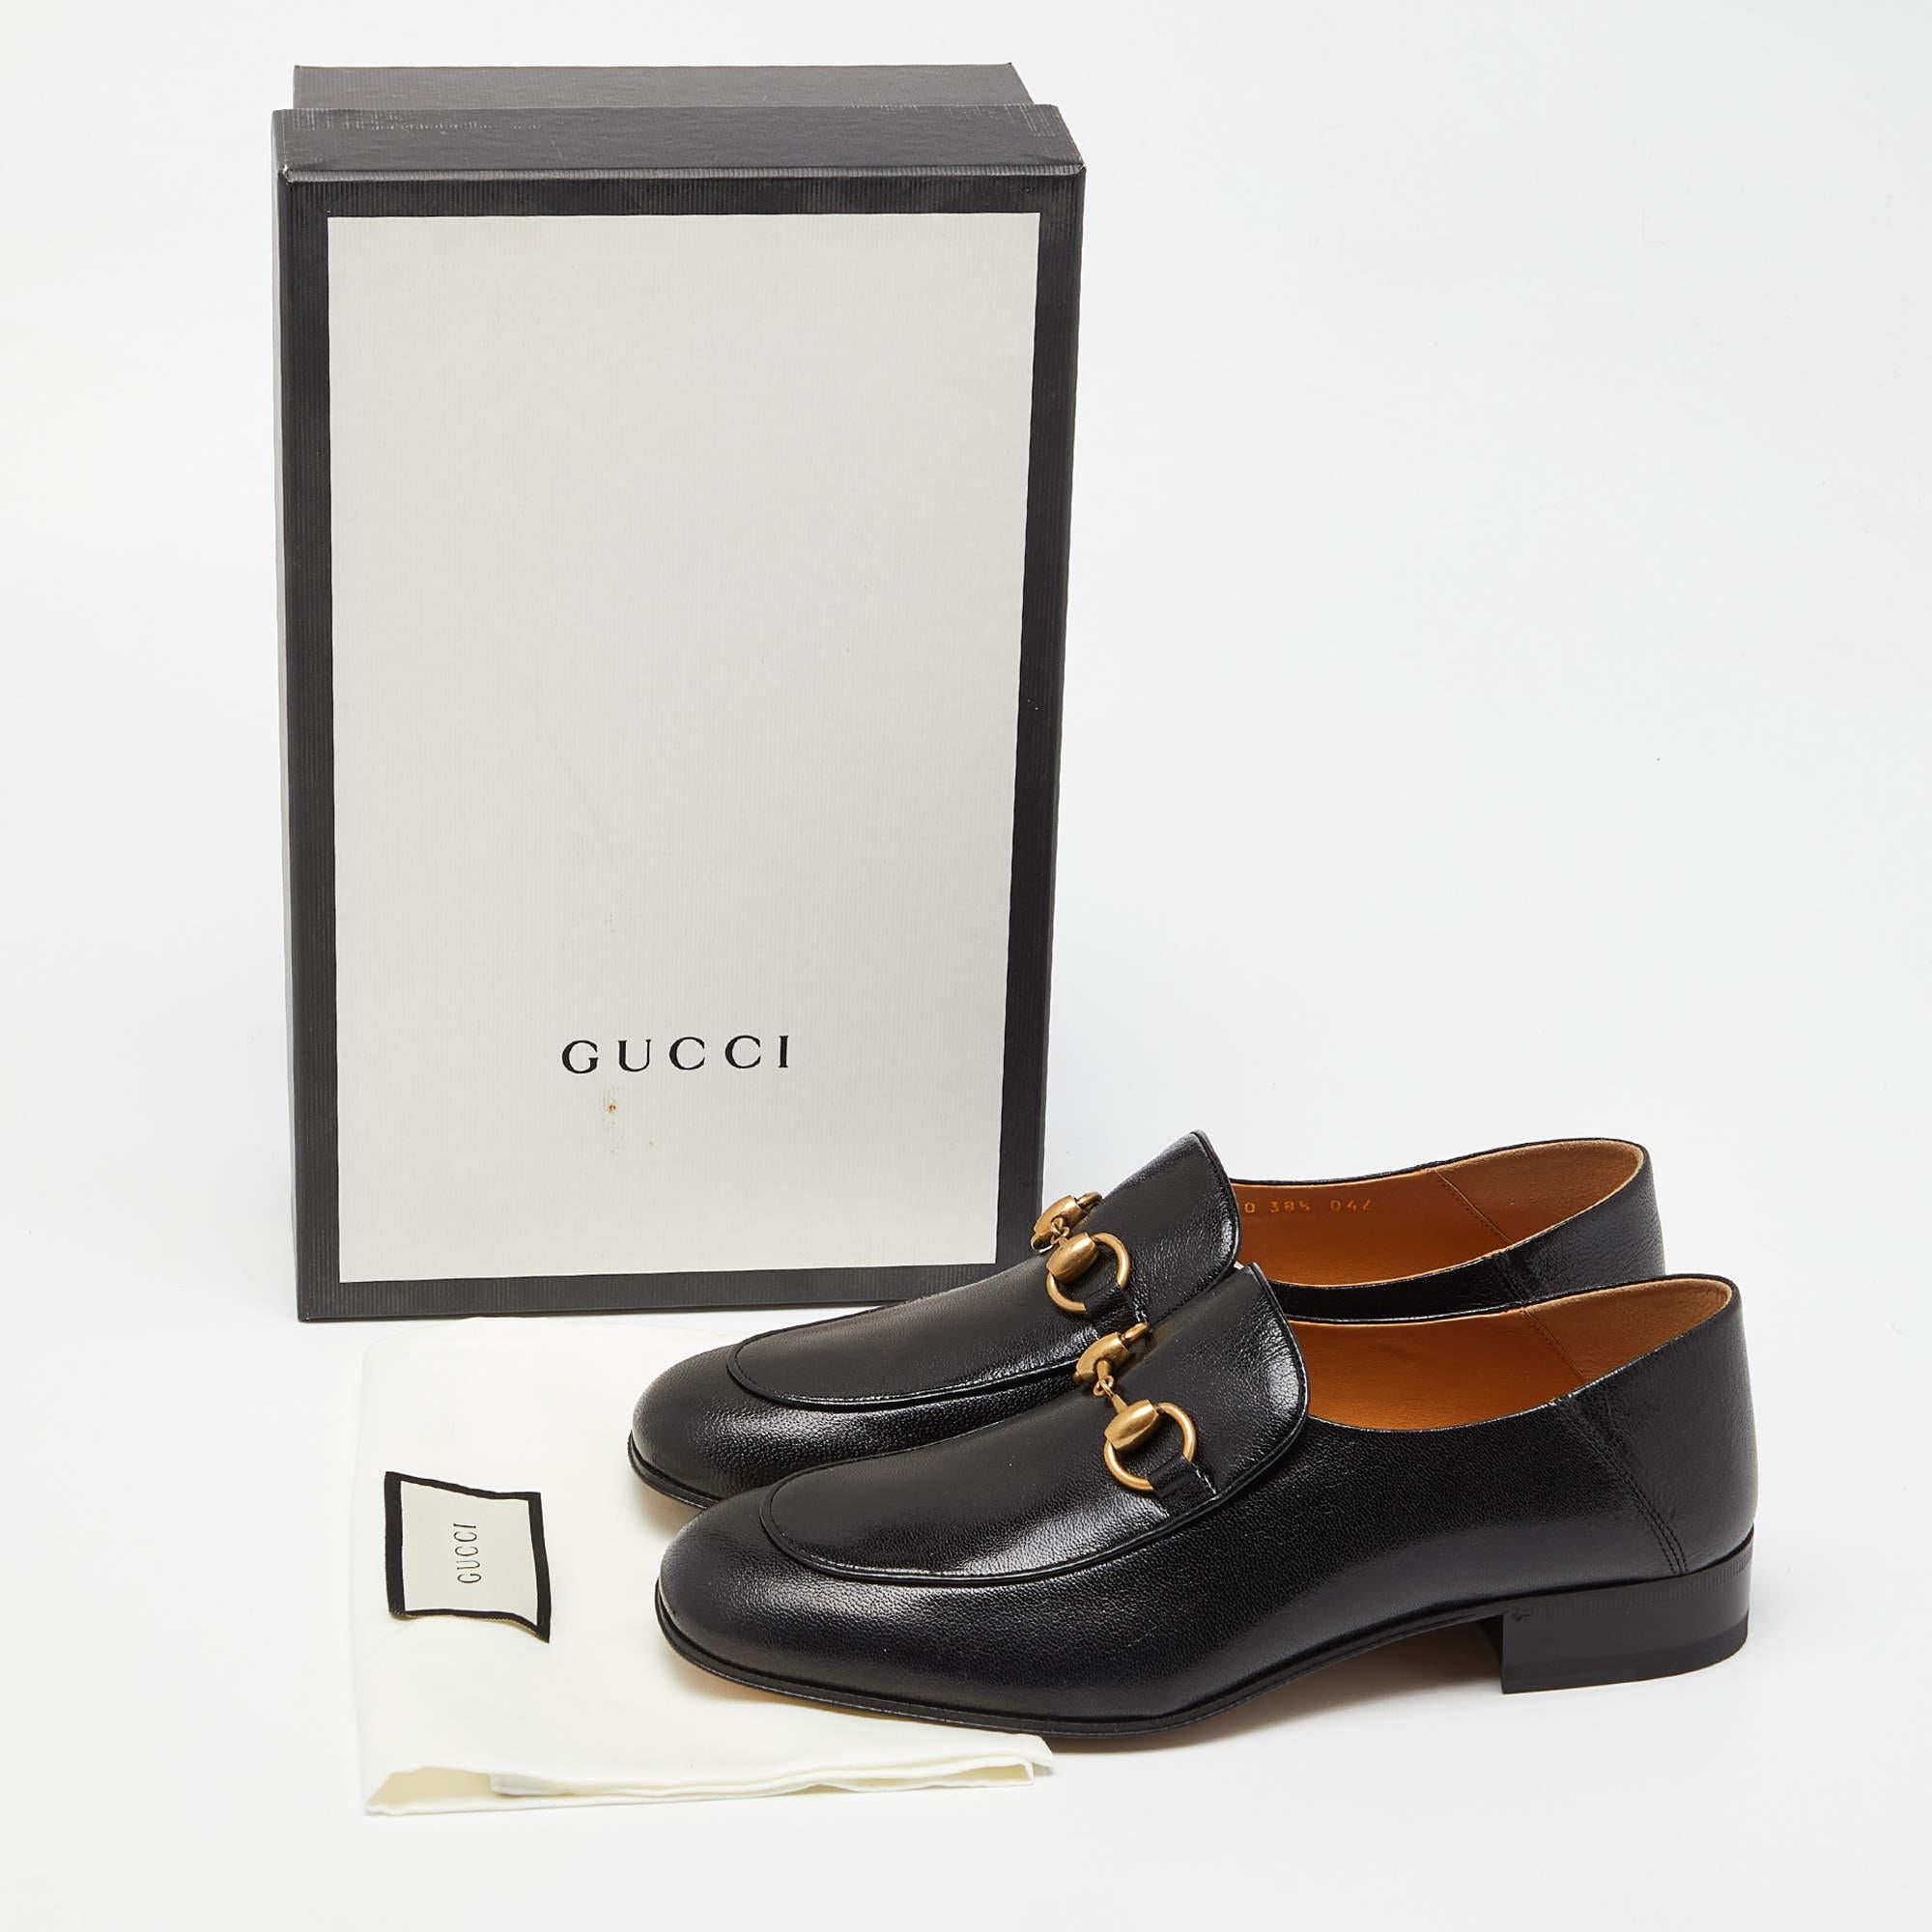 Gucci Black Leather Horsebit Loafers Size 38.5 5